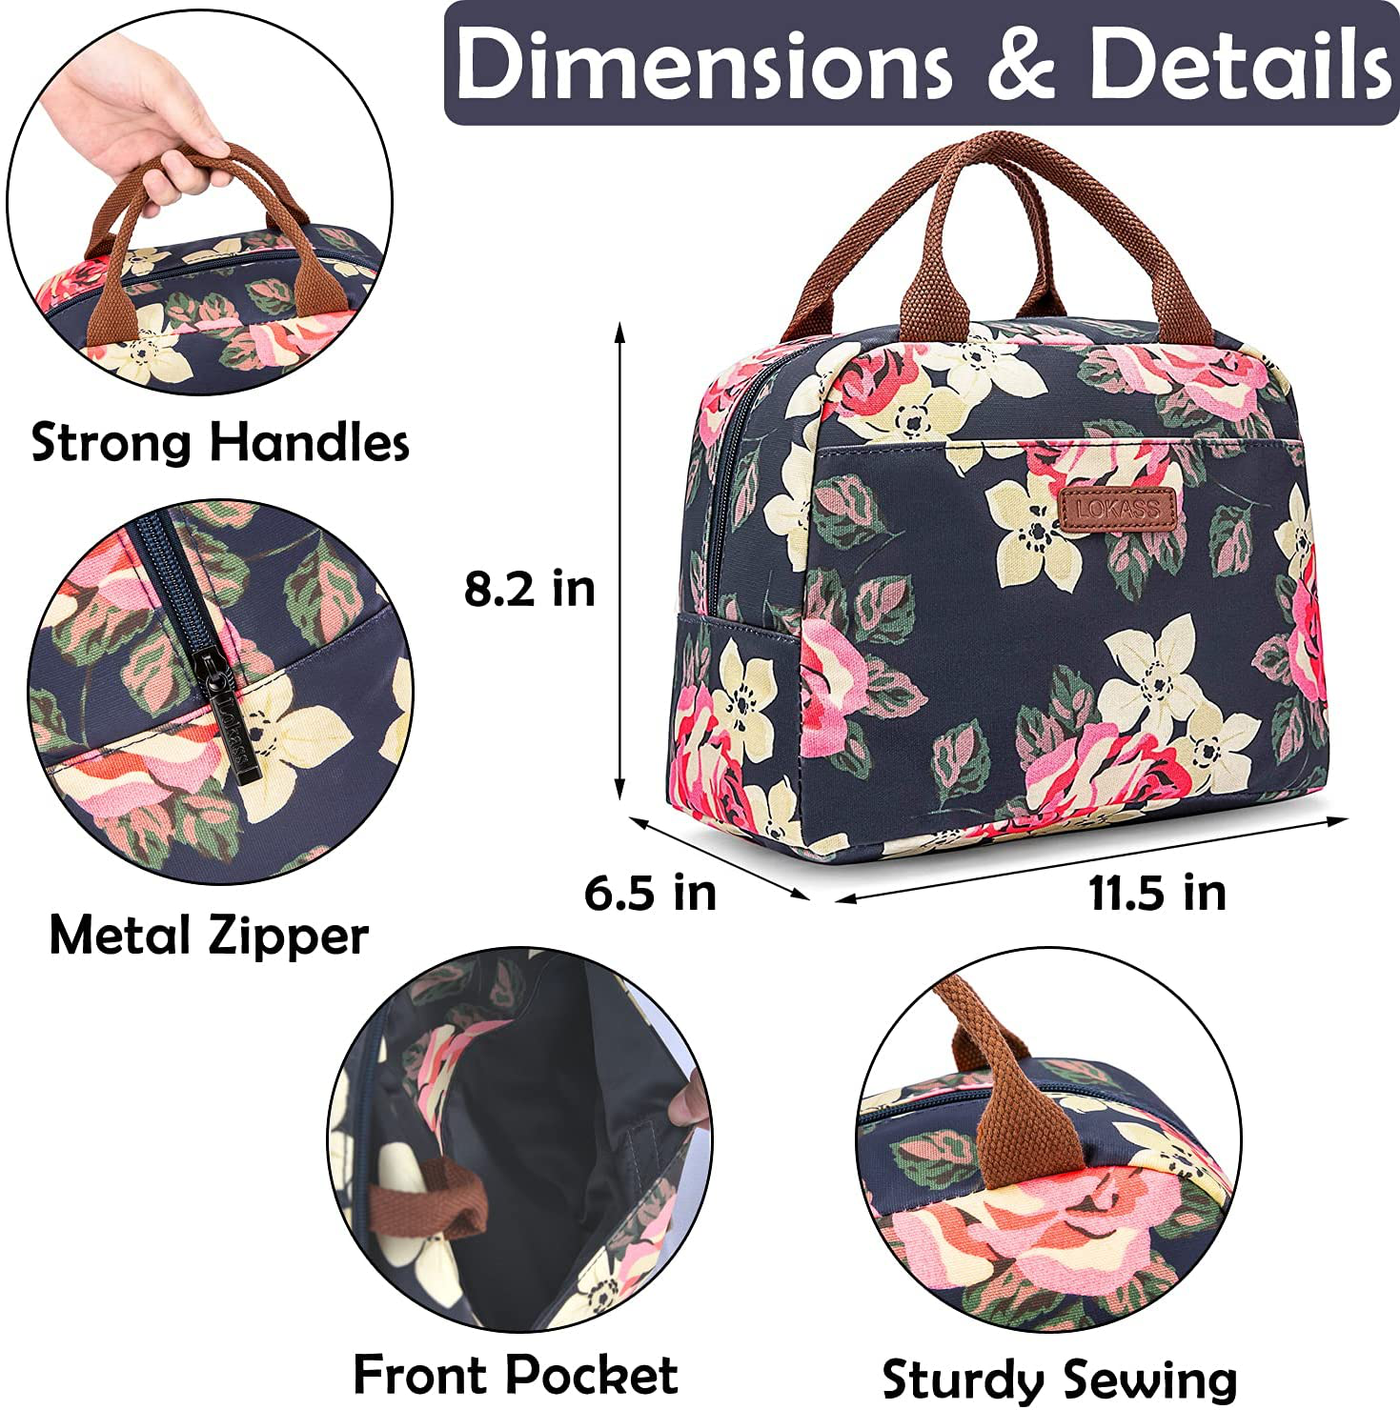 LOKASS Lunch Bag Cooler Bag Women Tote Bag Insulated Lunch Box Water-resistant Thermal Lunch Bag Soft Liner Lunch Bags for women/Picnic/Boating/Beach/Fishing/Work (Black+Triangle)